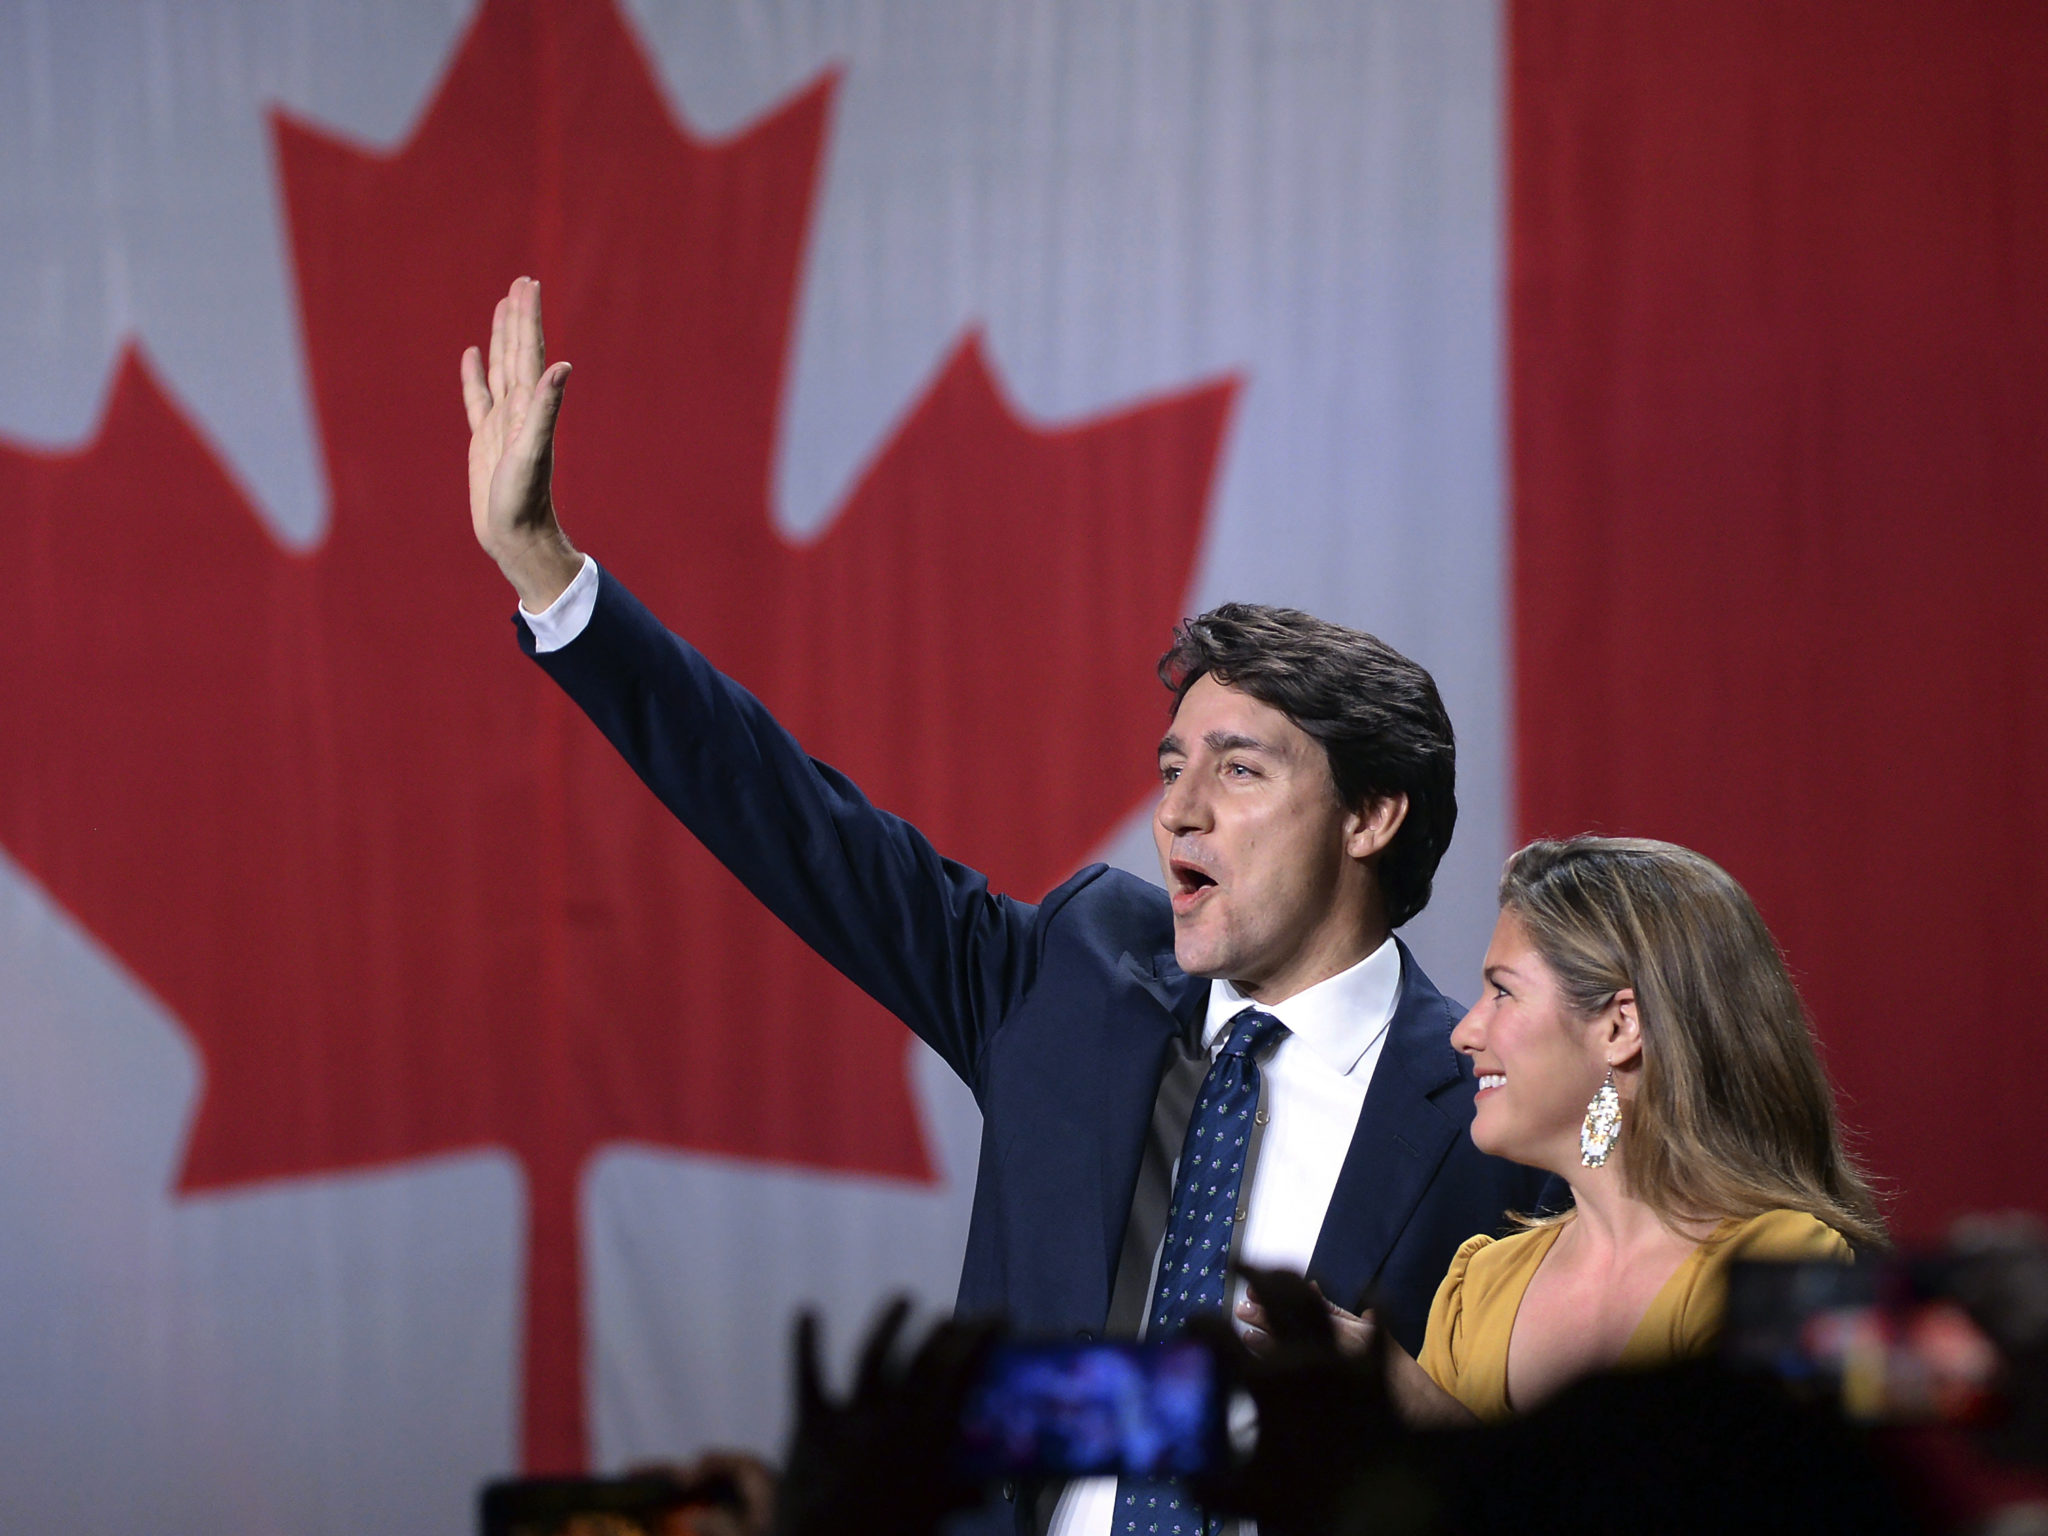 Canada Elections 2019: Trudeau’s Liberal Party win but loses majority decoding=